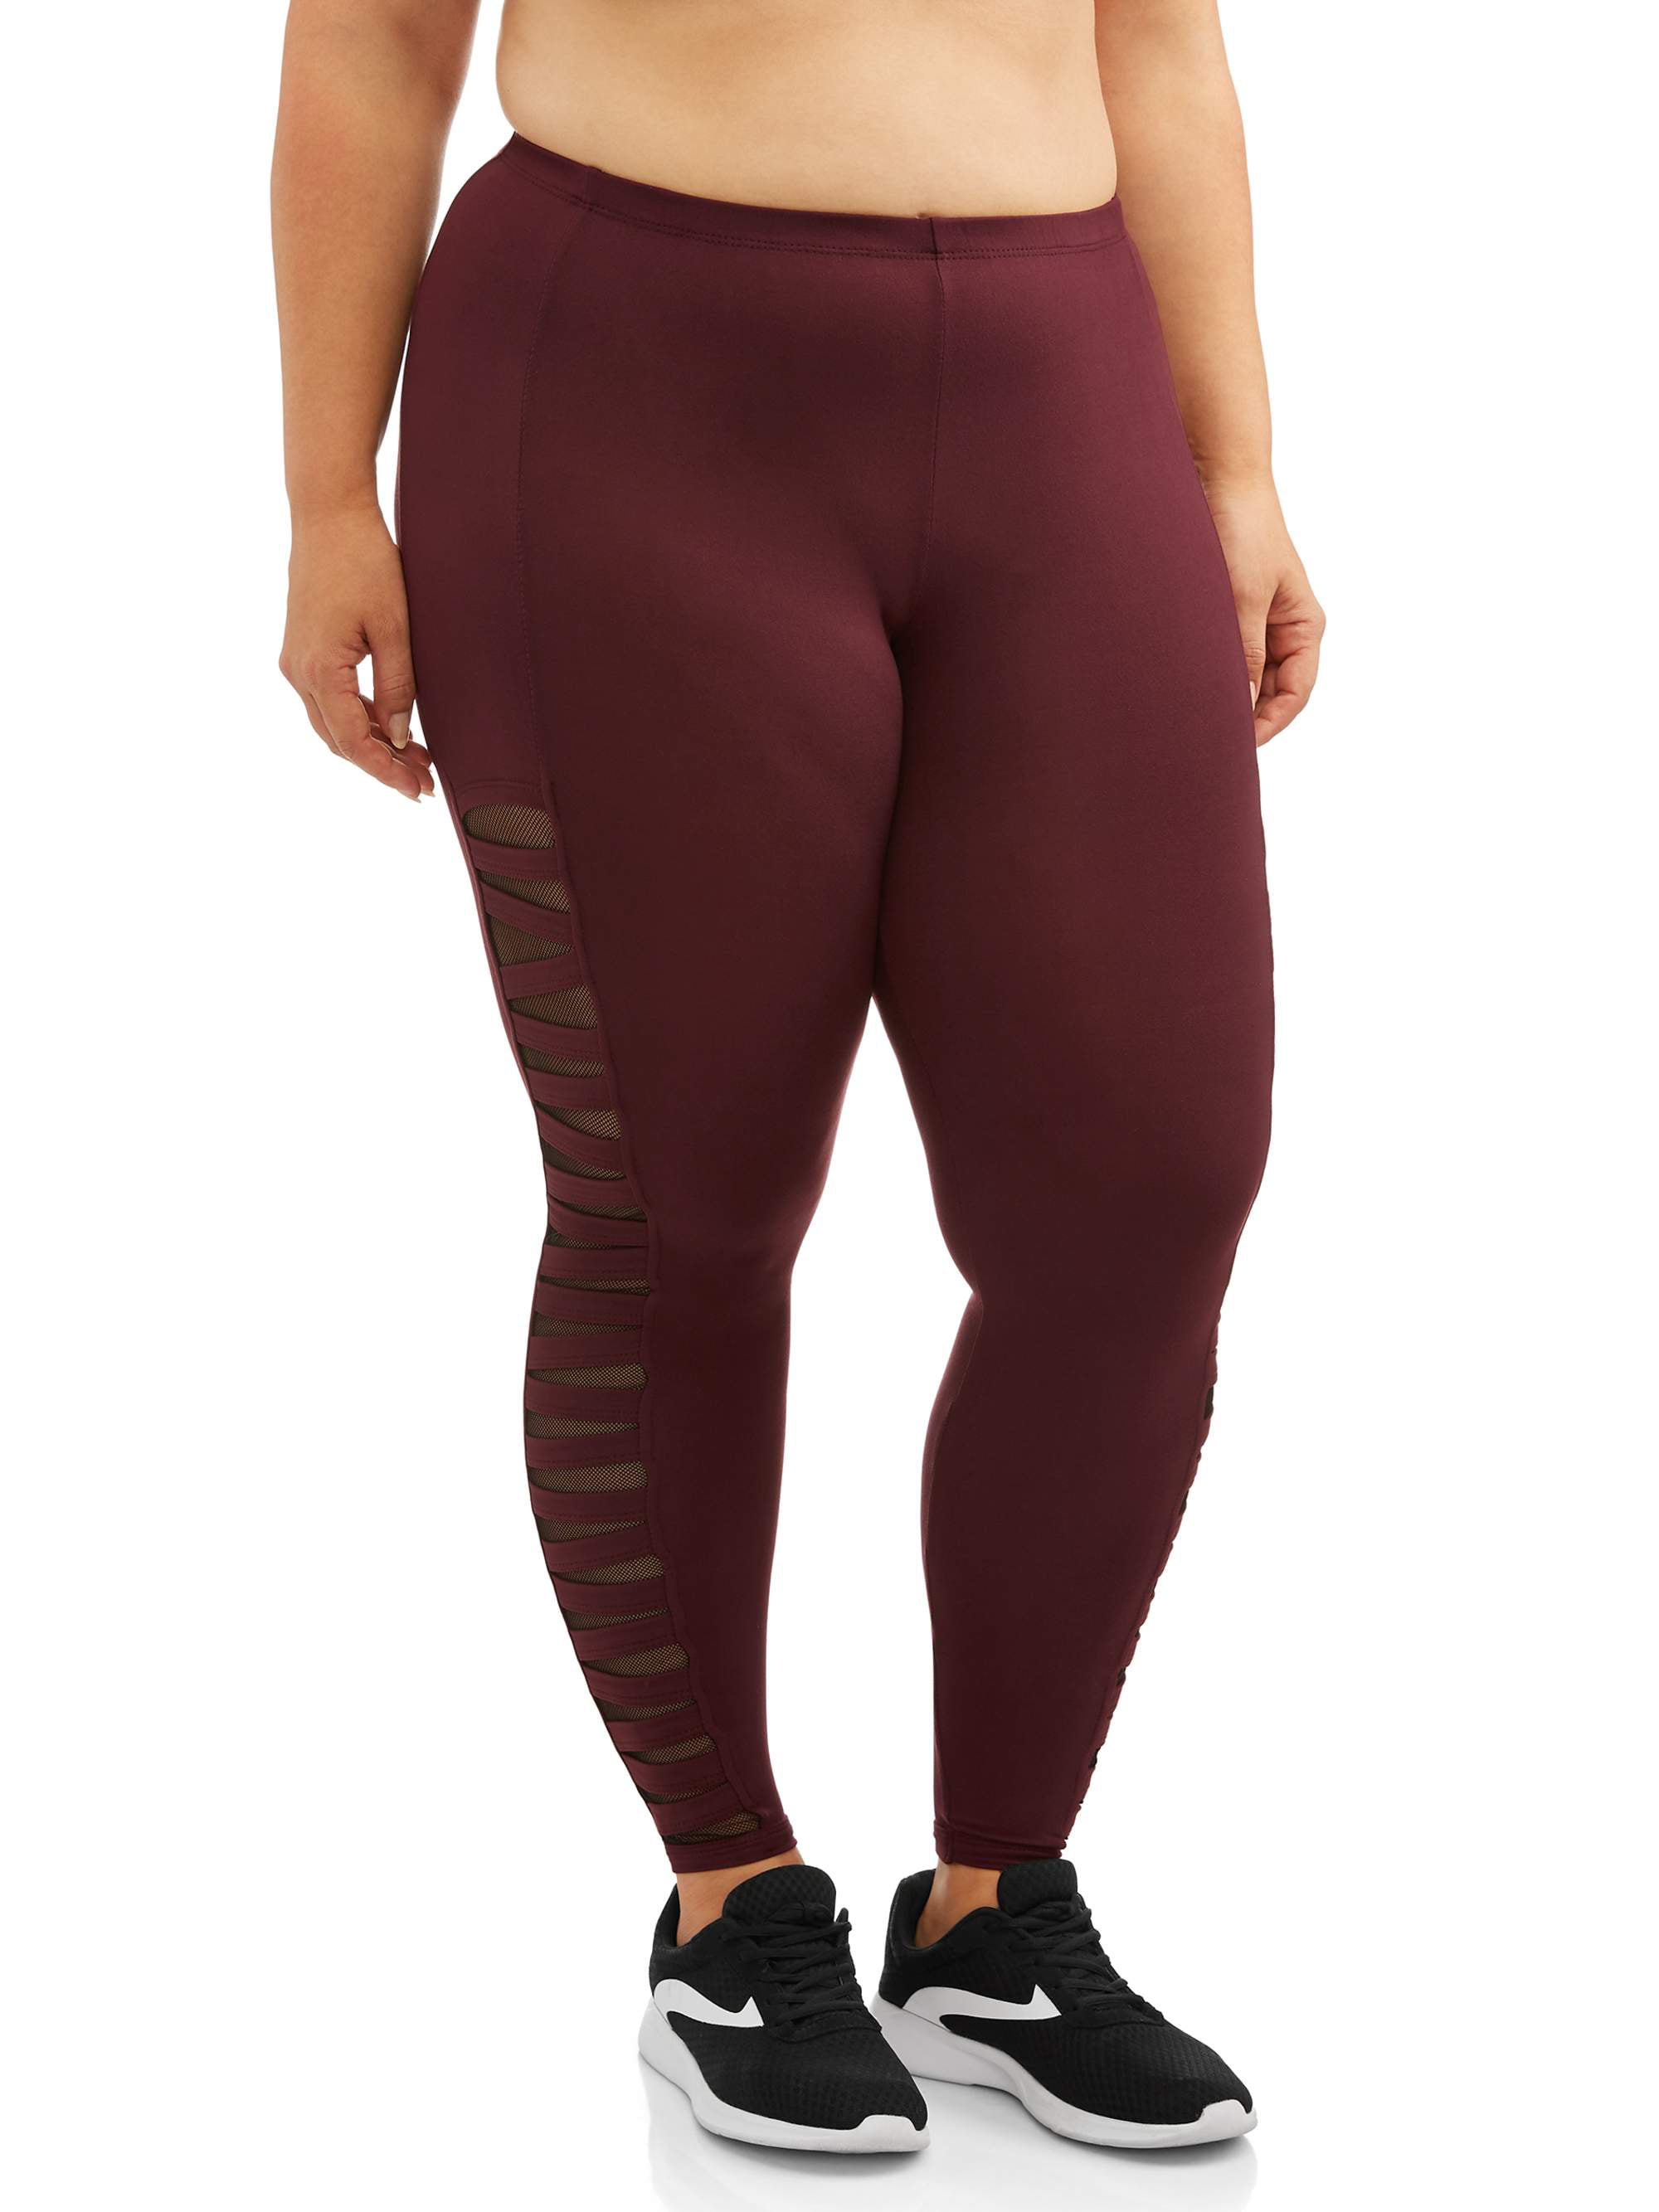 Eye Candy Women's Plus Size Active Full Length Cut Out Legging with Mesh  Inserts 